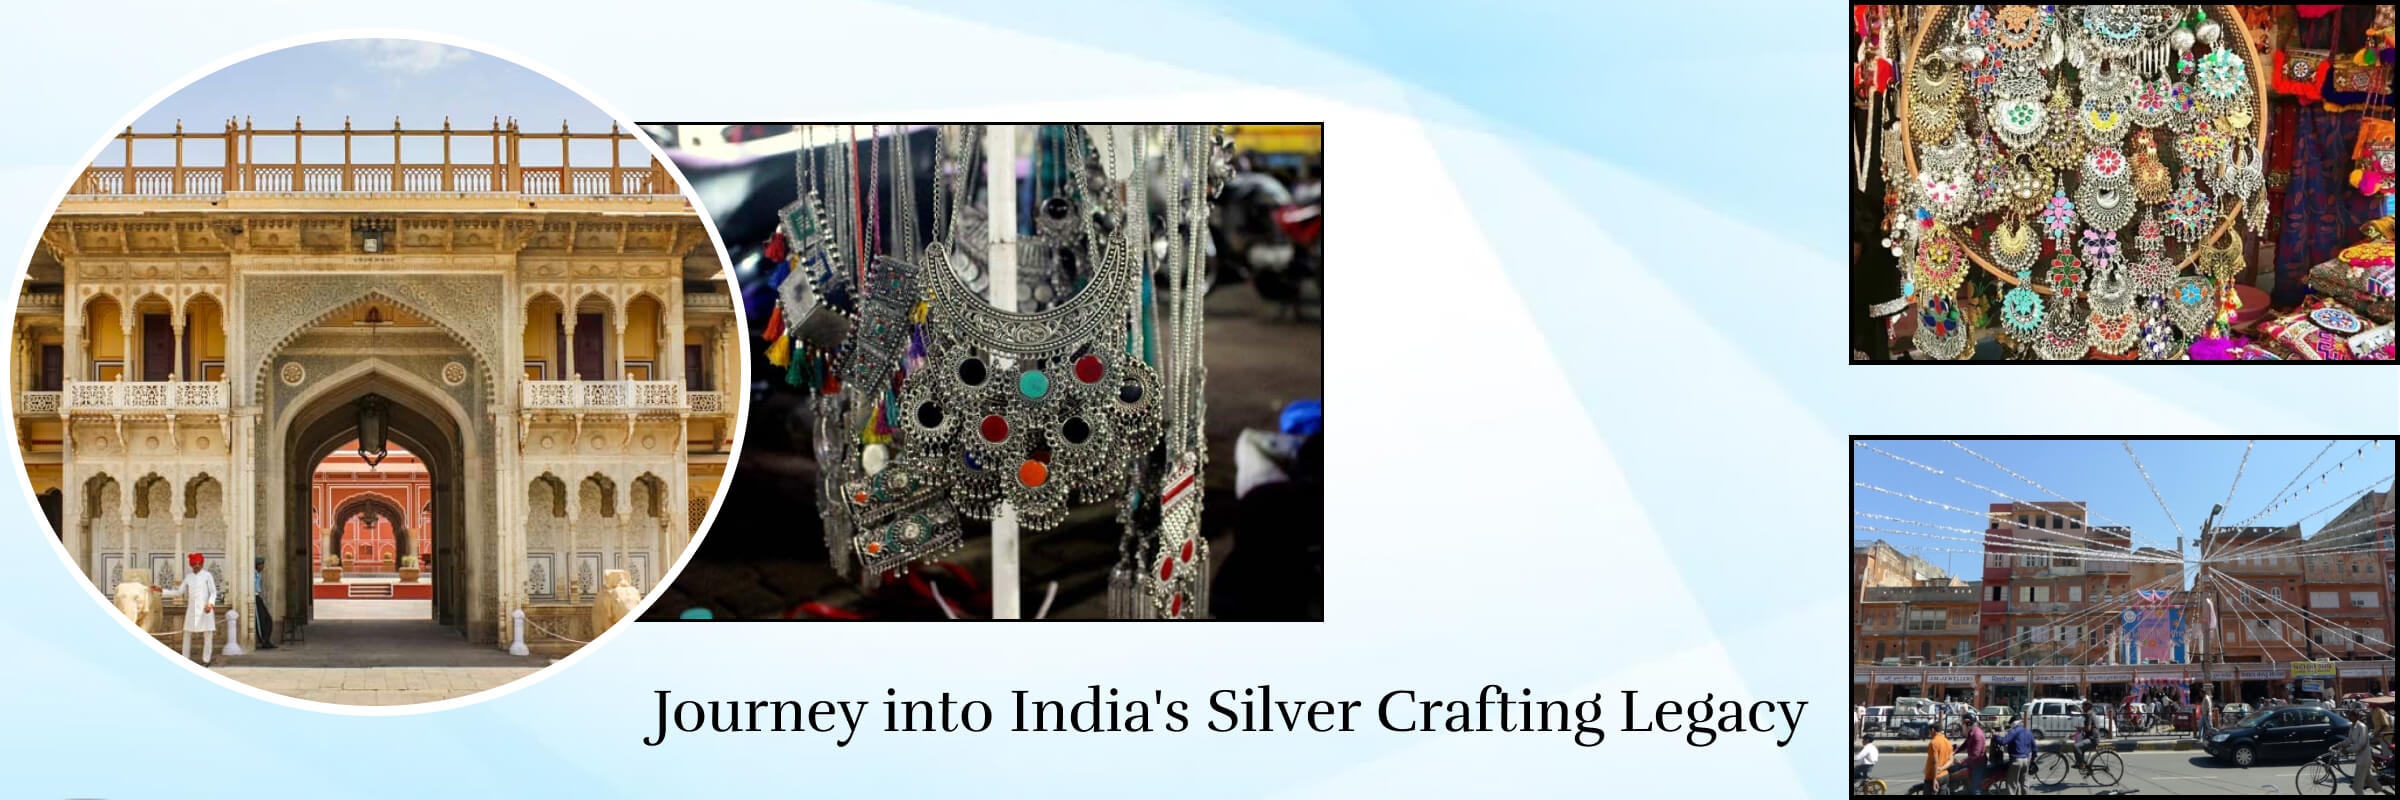 Chronicle of handcrafted silver jewelry in India